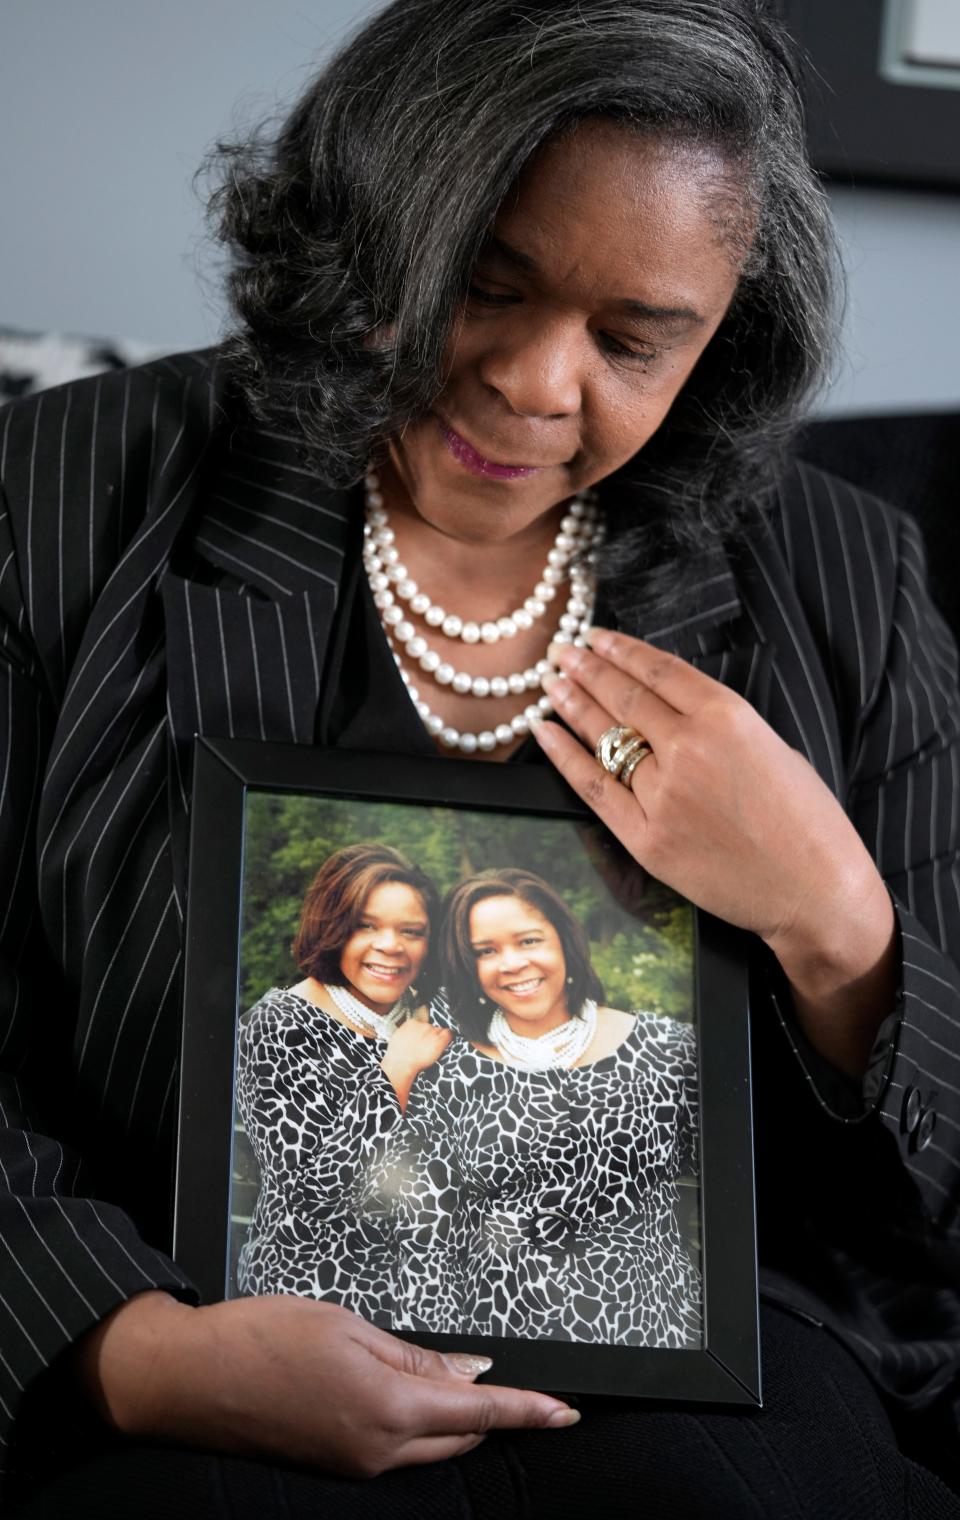 Carolyn Williams Francis holds a photo of her and her sister Carla Bailey who passed away last year from breast cancer. and also suffered from heart issues. Williams Francis has had two heart stents inserted to prevent having a heart attack herself. She believes the stress of being a Black woman business owner has had an impact on her health.